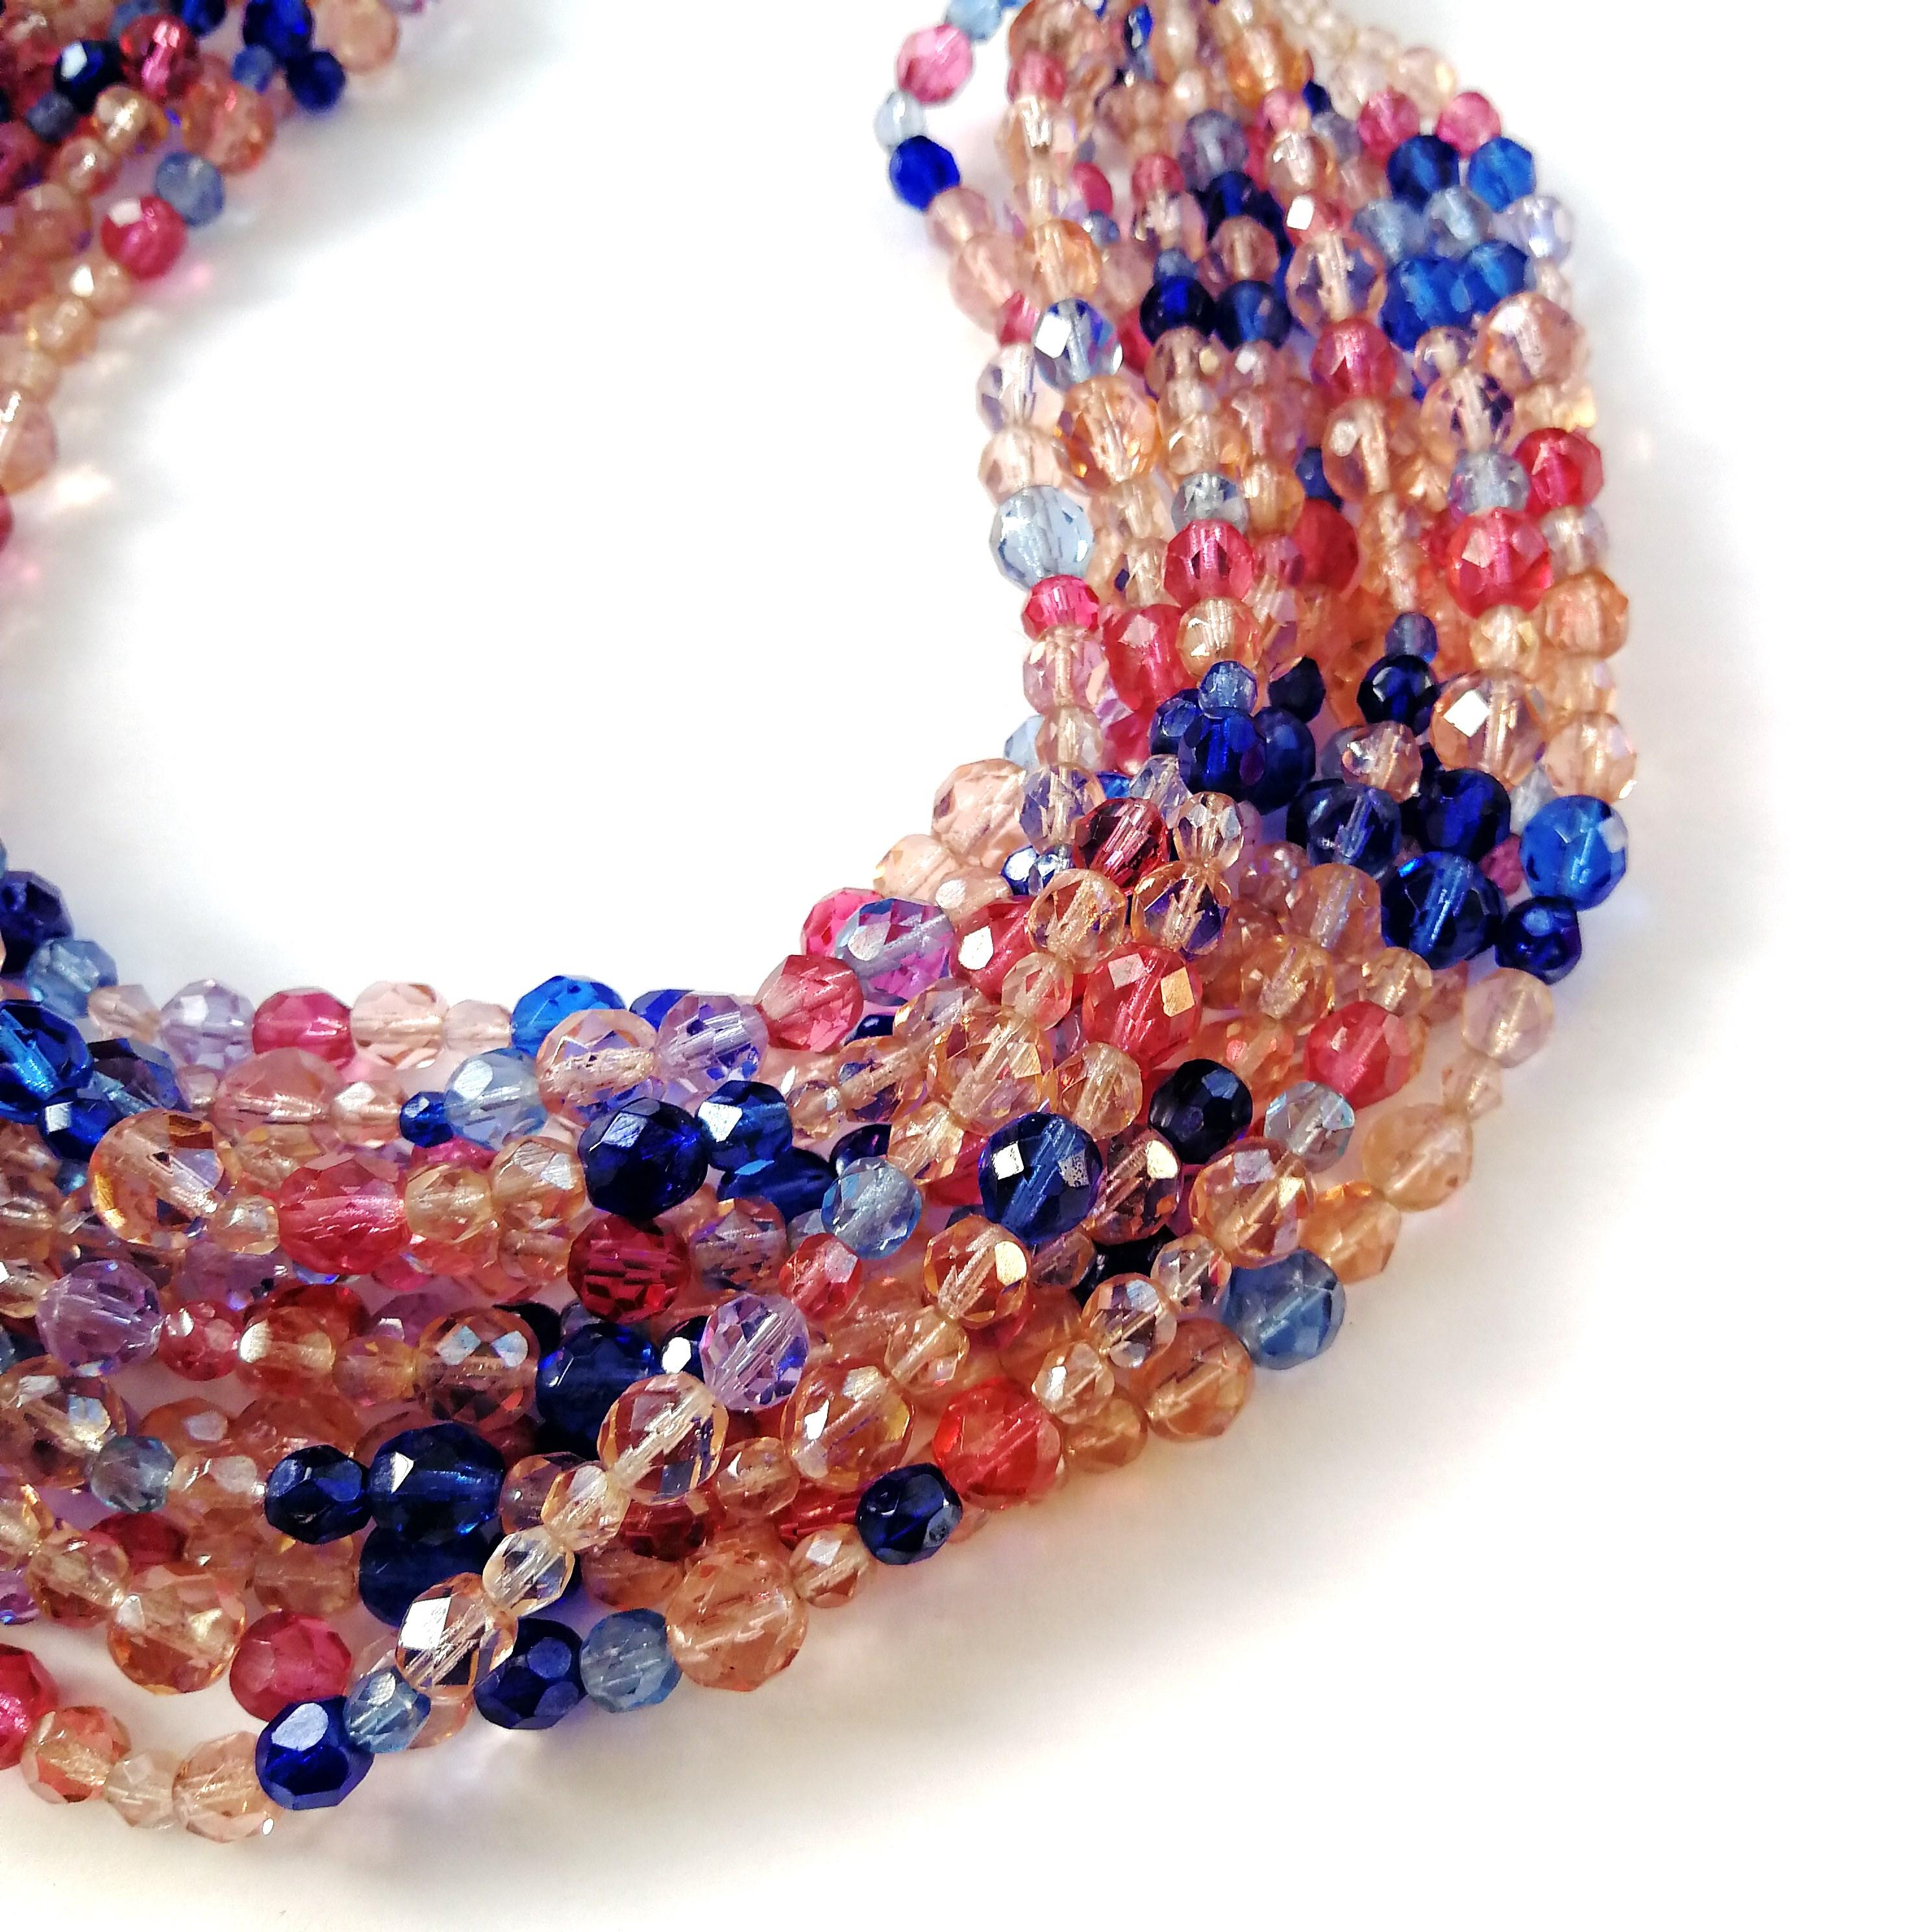 A beautiful multi row, multi coloured half crystal faceted beads in soft pink, respberry, mid blue and Royal blue, fresh and joyful.  Consisting of 13 rows in total, it is a sumptuous addition to any collection or wardrobe, equally matched for